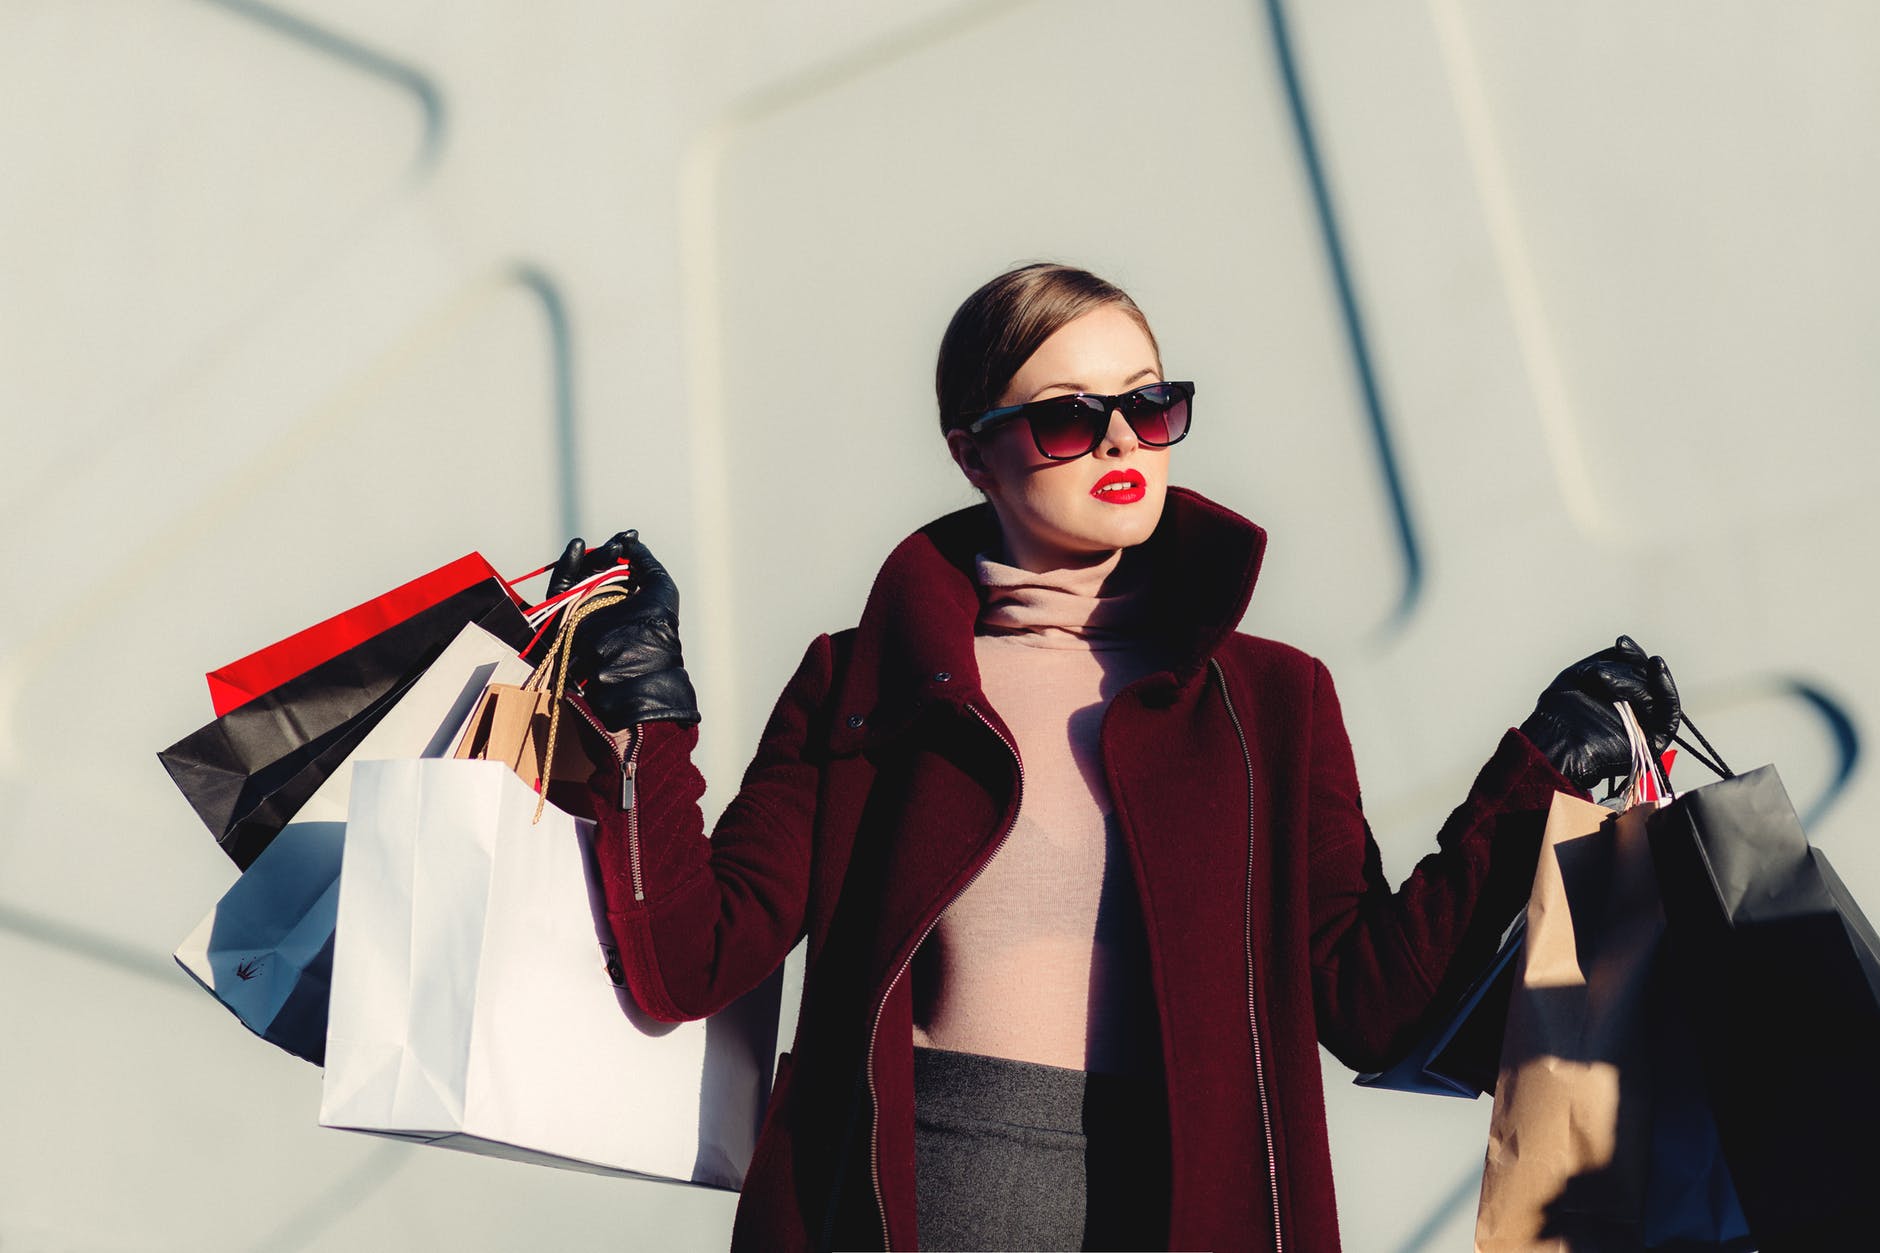 FASHION RETAILERS QUESTIONED ABOUT SUSTAINABILITY